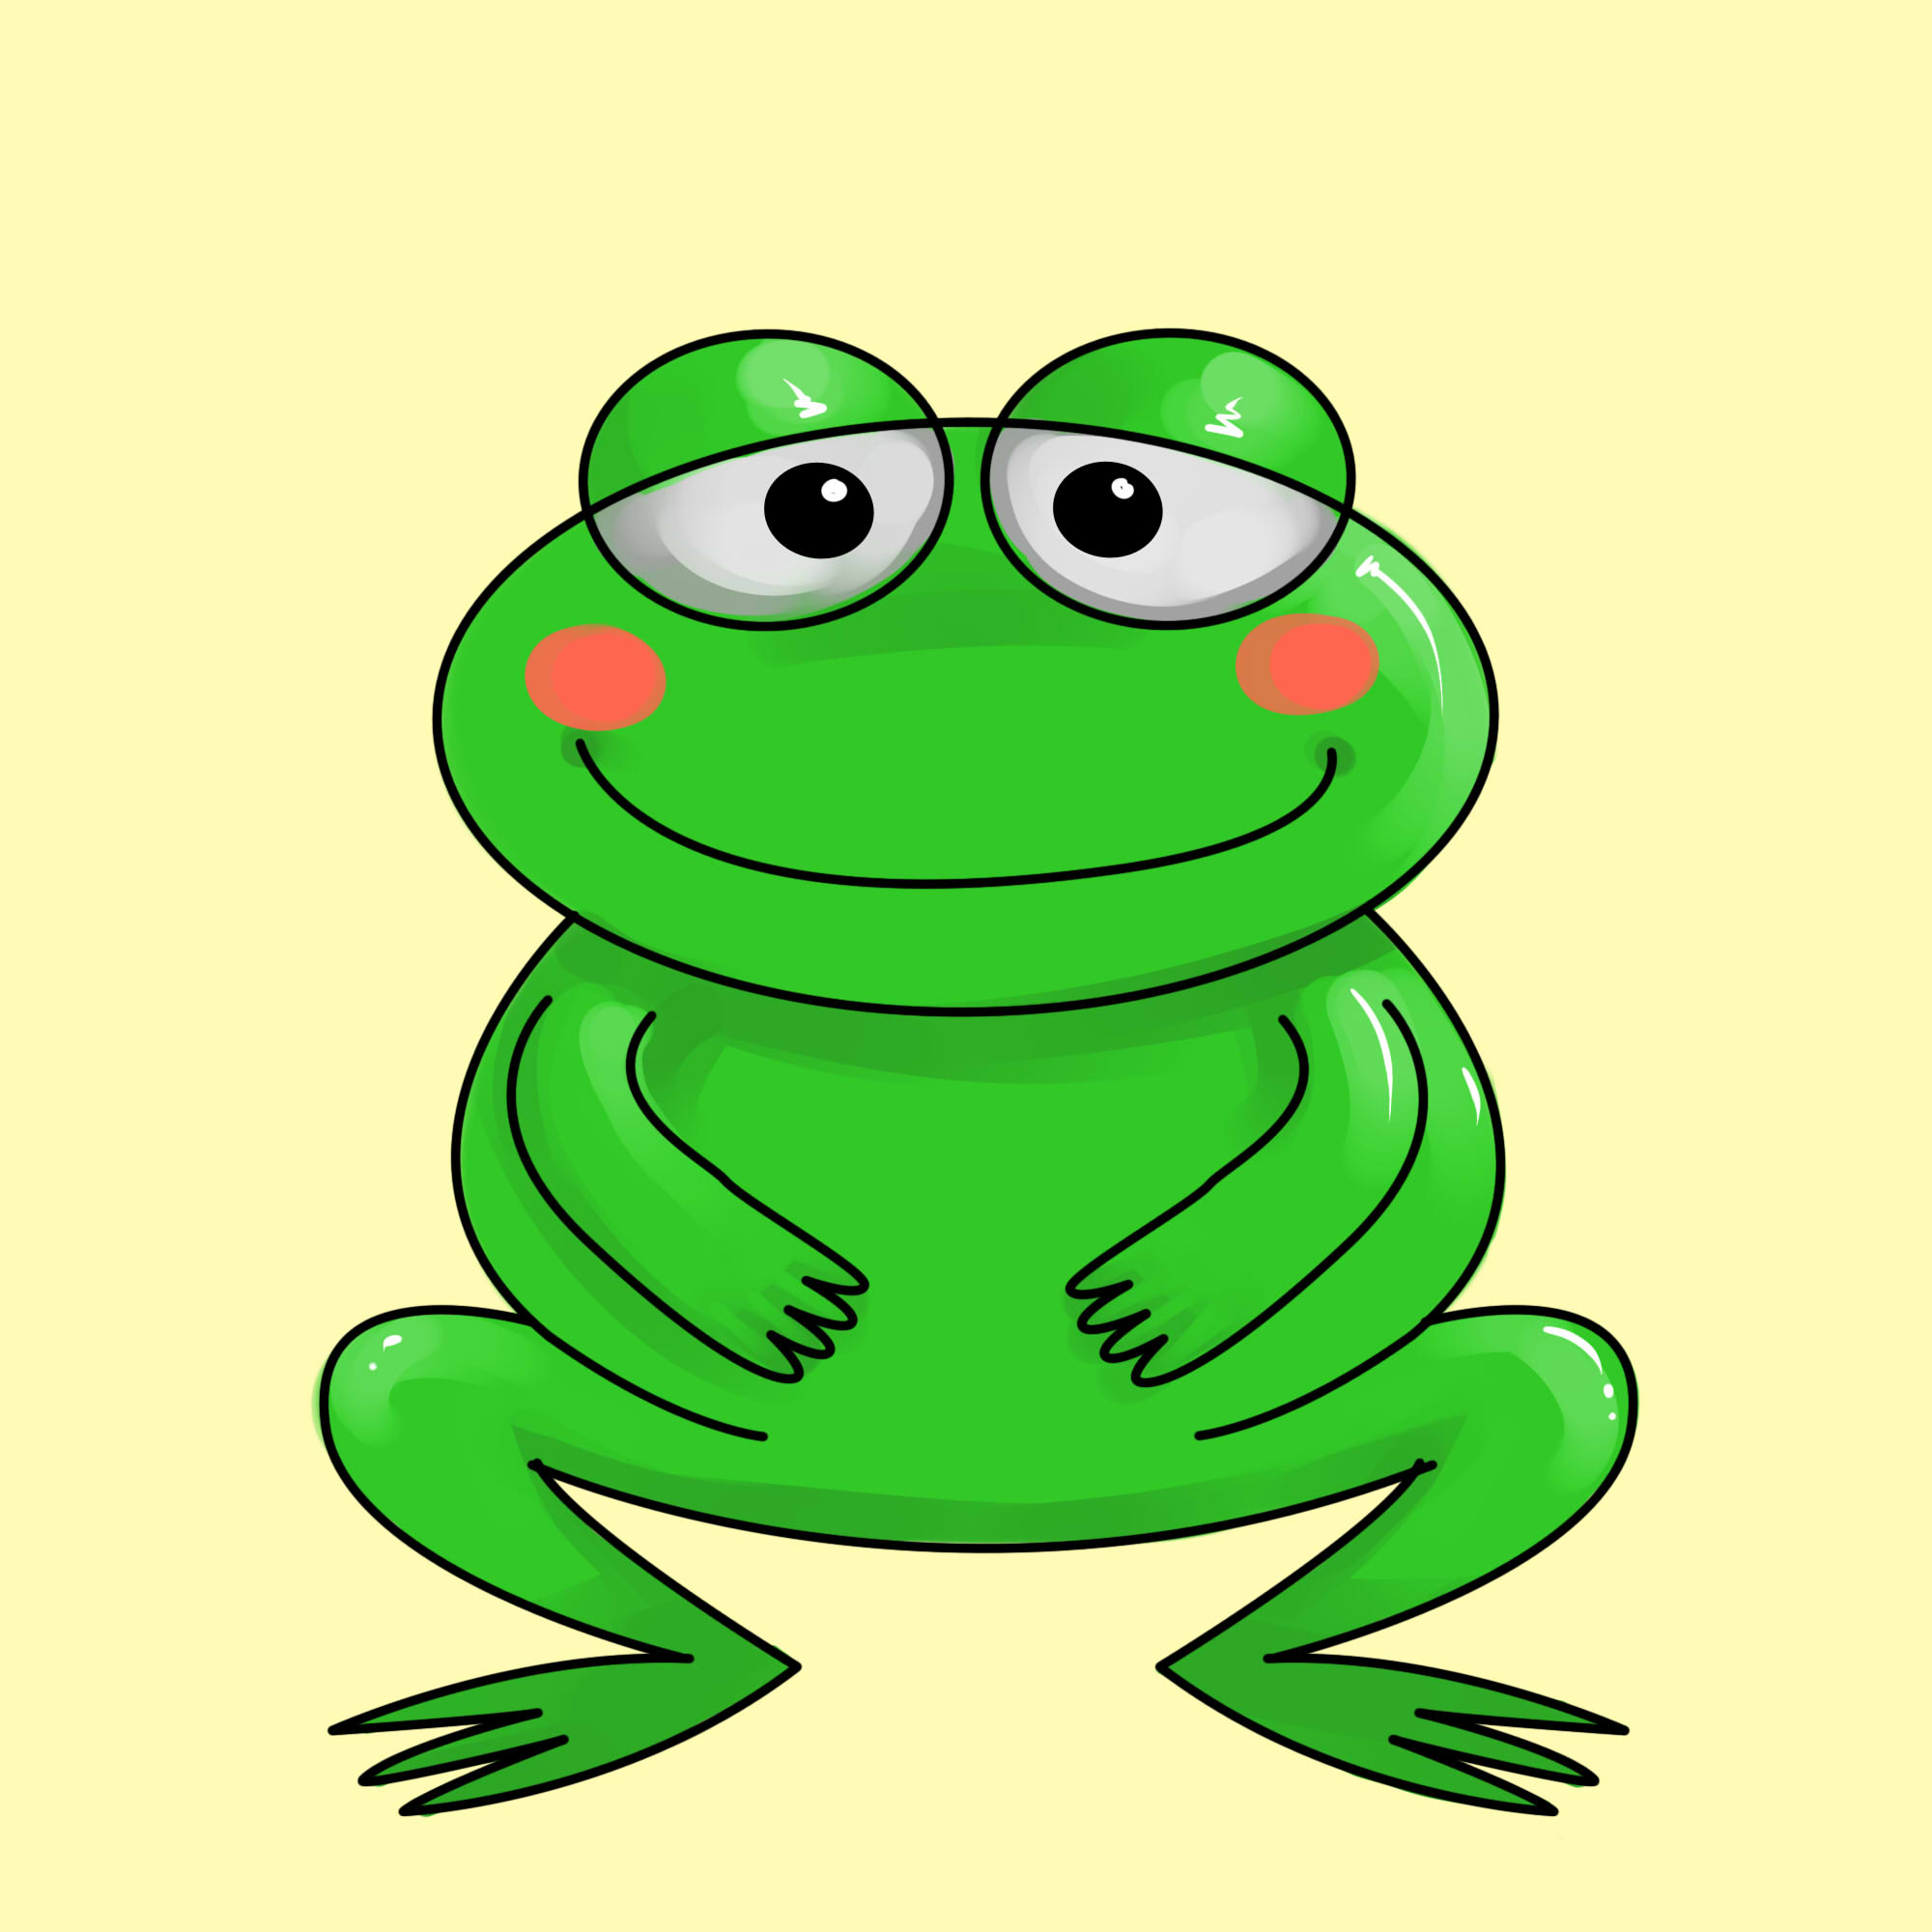 Frog Cartoon Image HD Wallpaper And Pictures